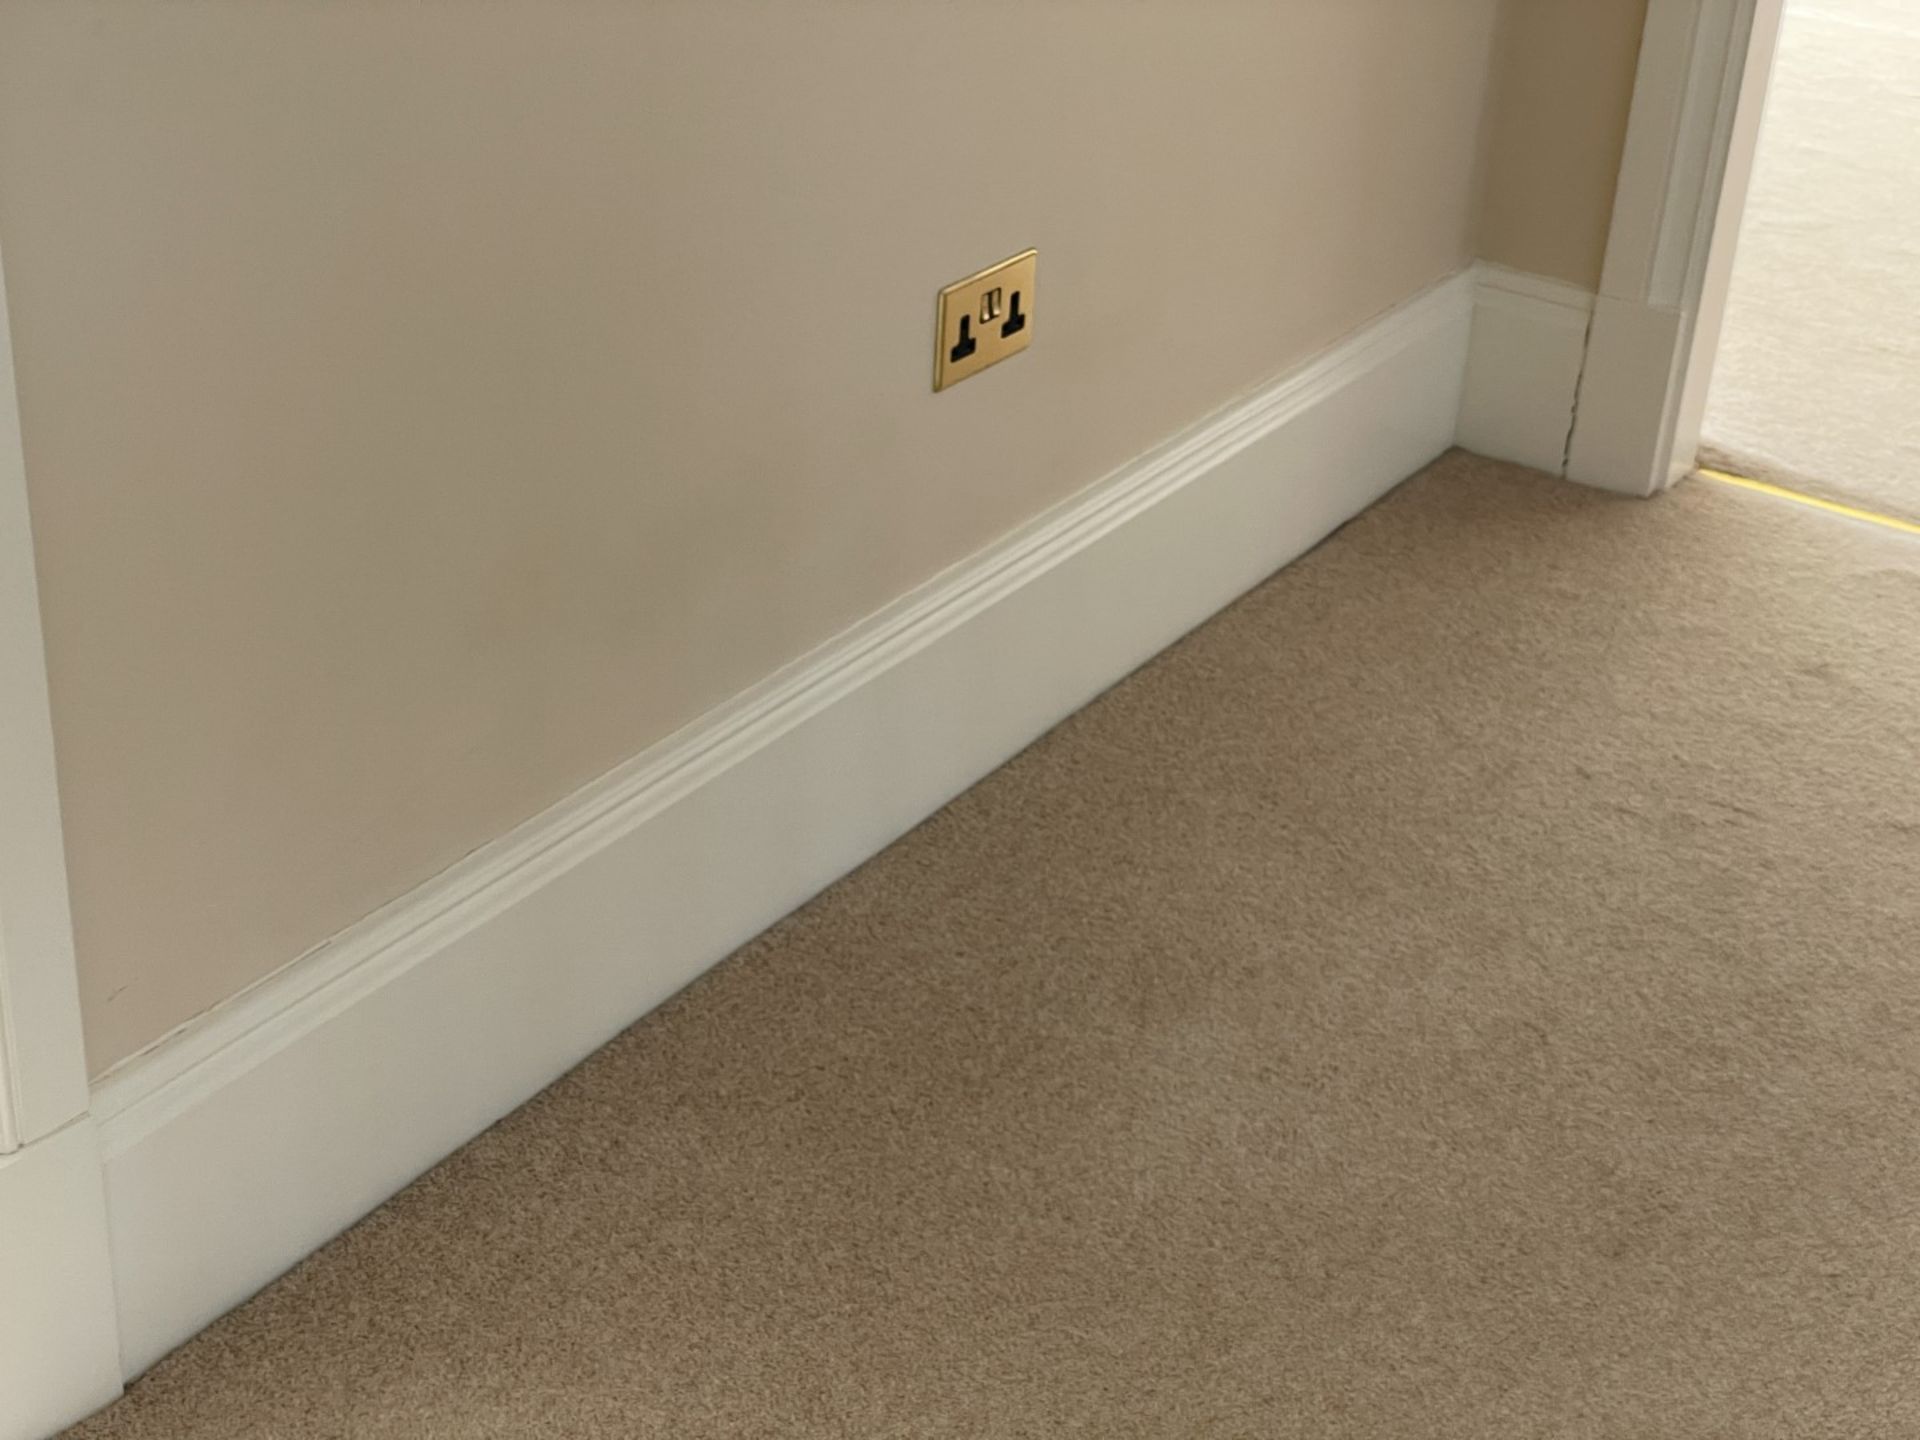 Approximately 20-Metres of Painted Timber Wooden Skirting Boards, In White - Ref: PAN219 - CL896 - - Image 5 of 8